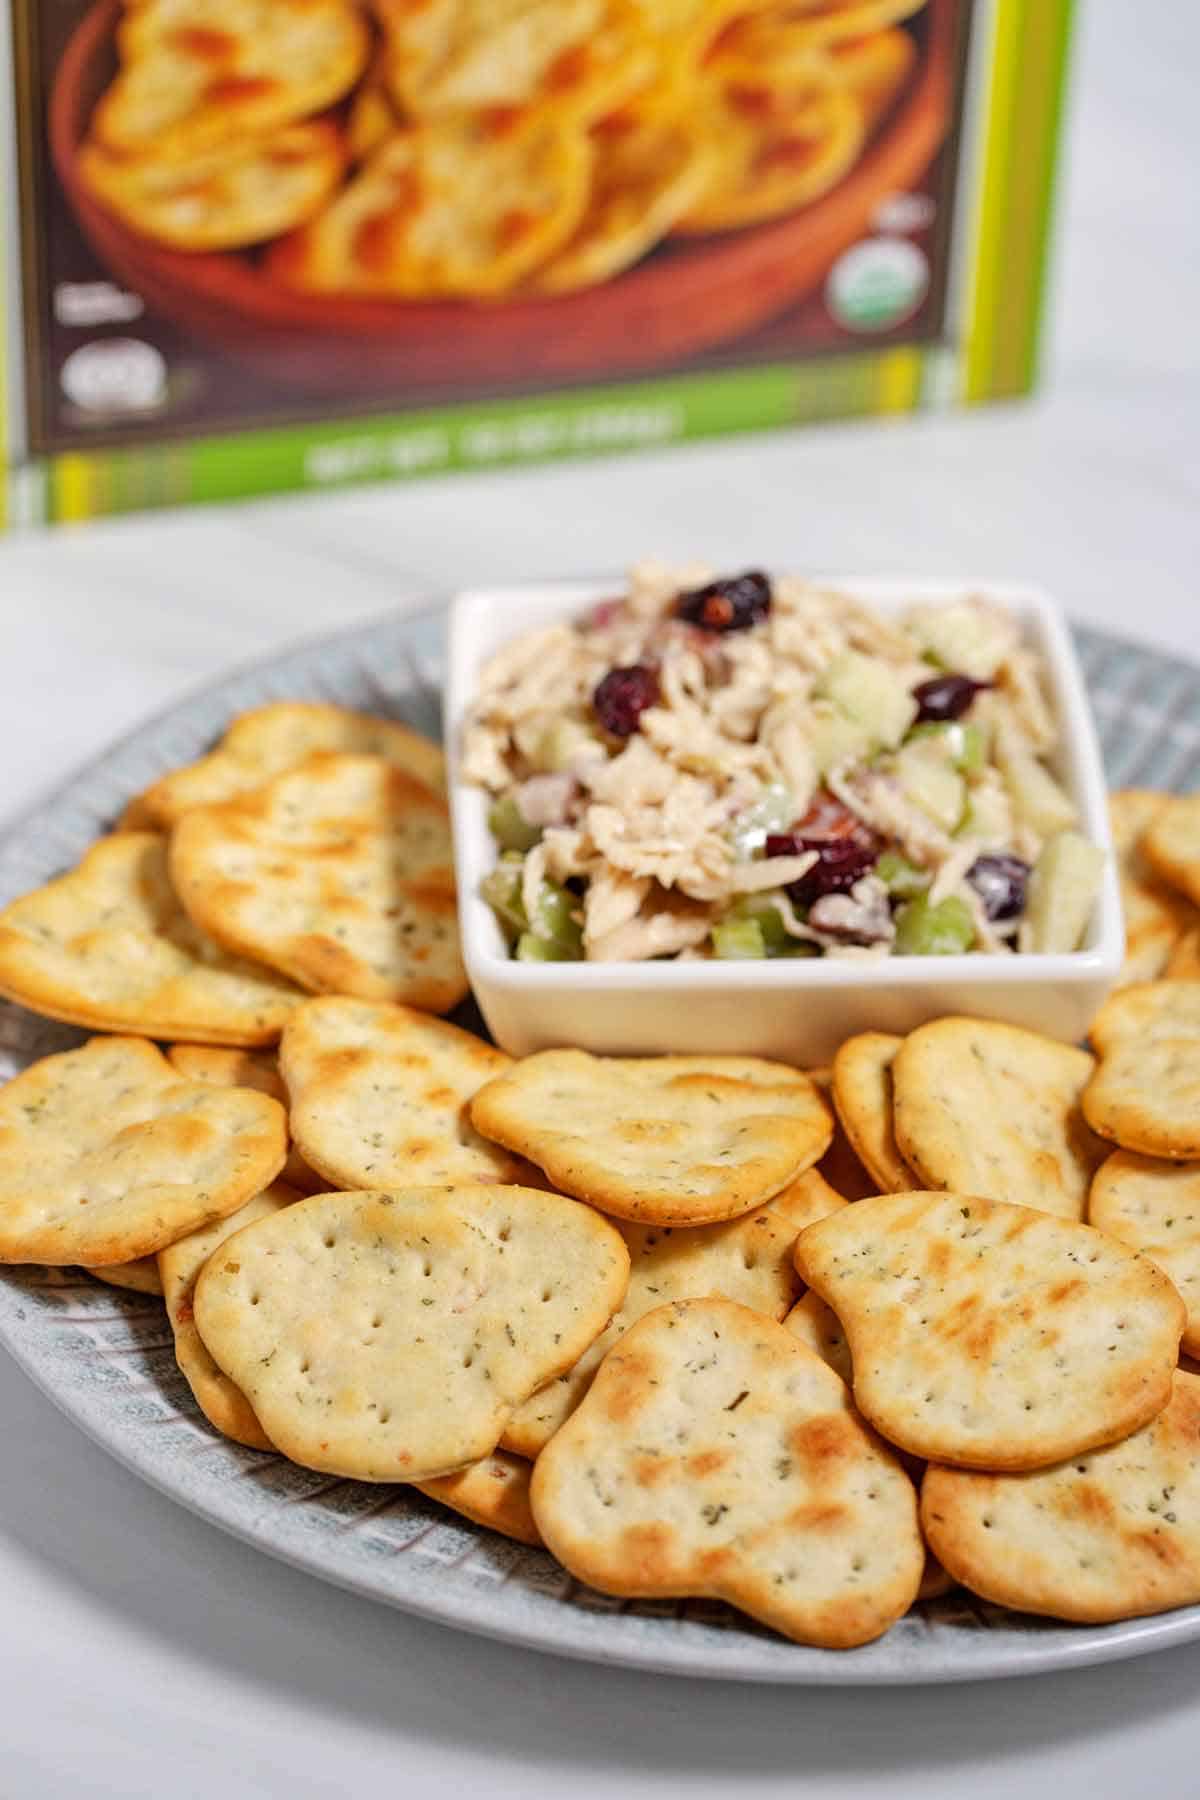 Plate of naan crackers and a bowl of chicken salad.